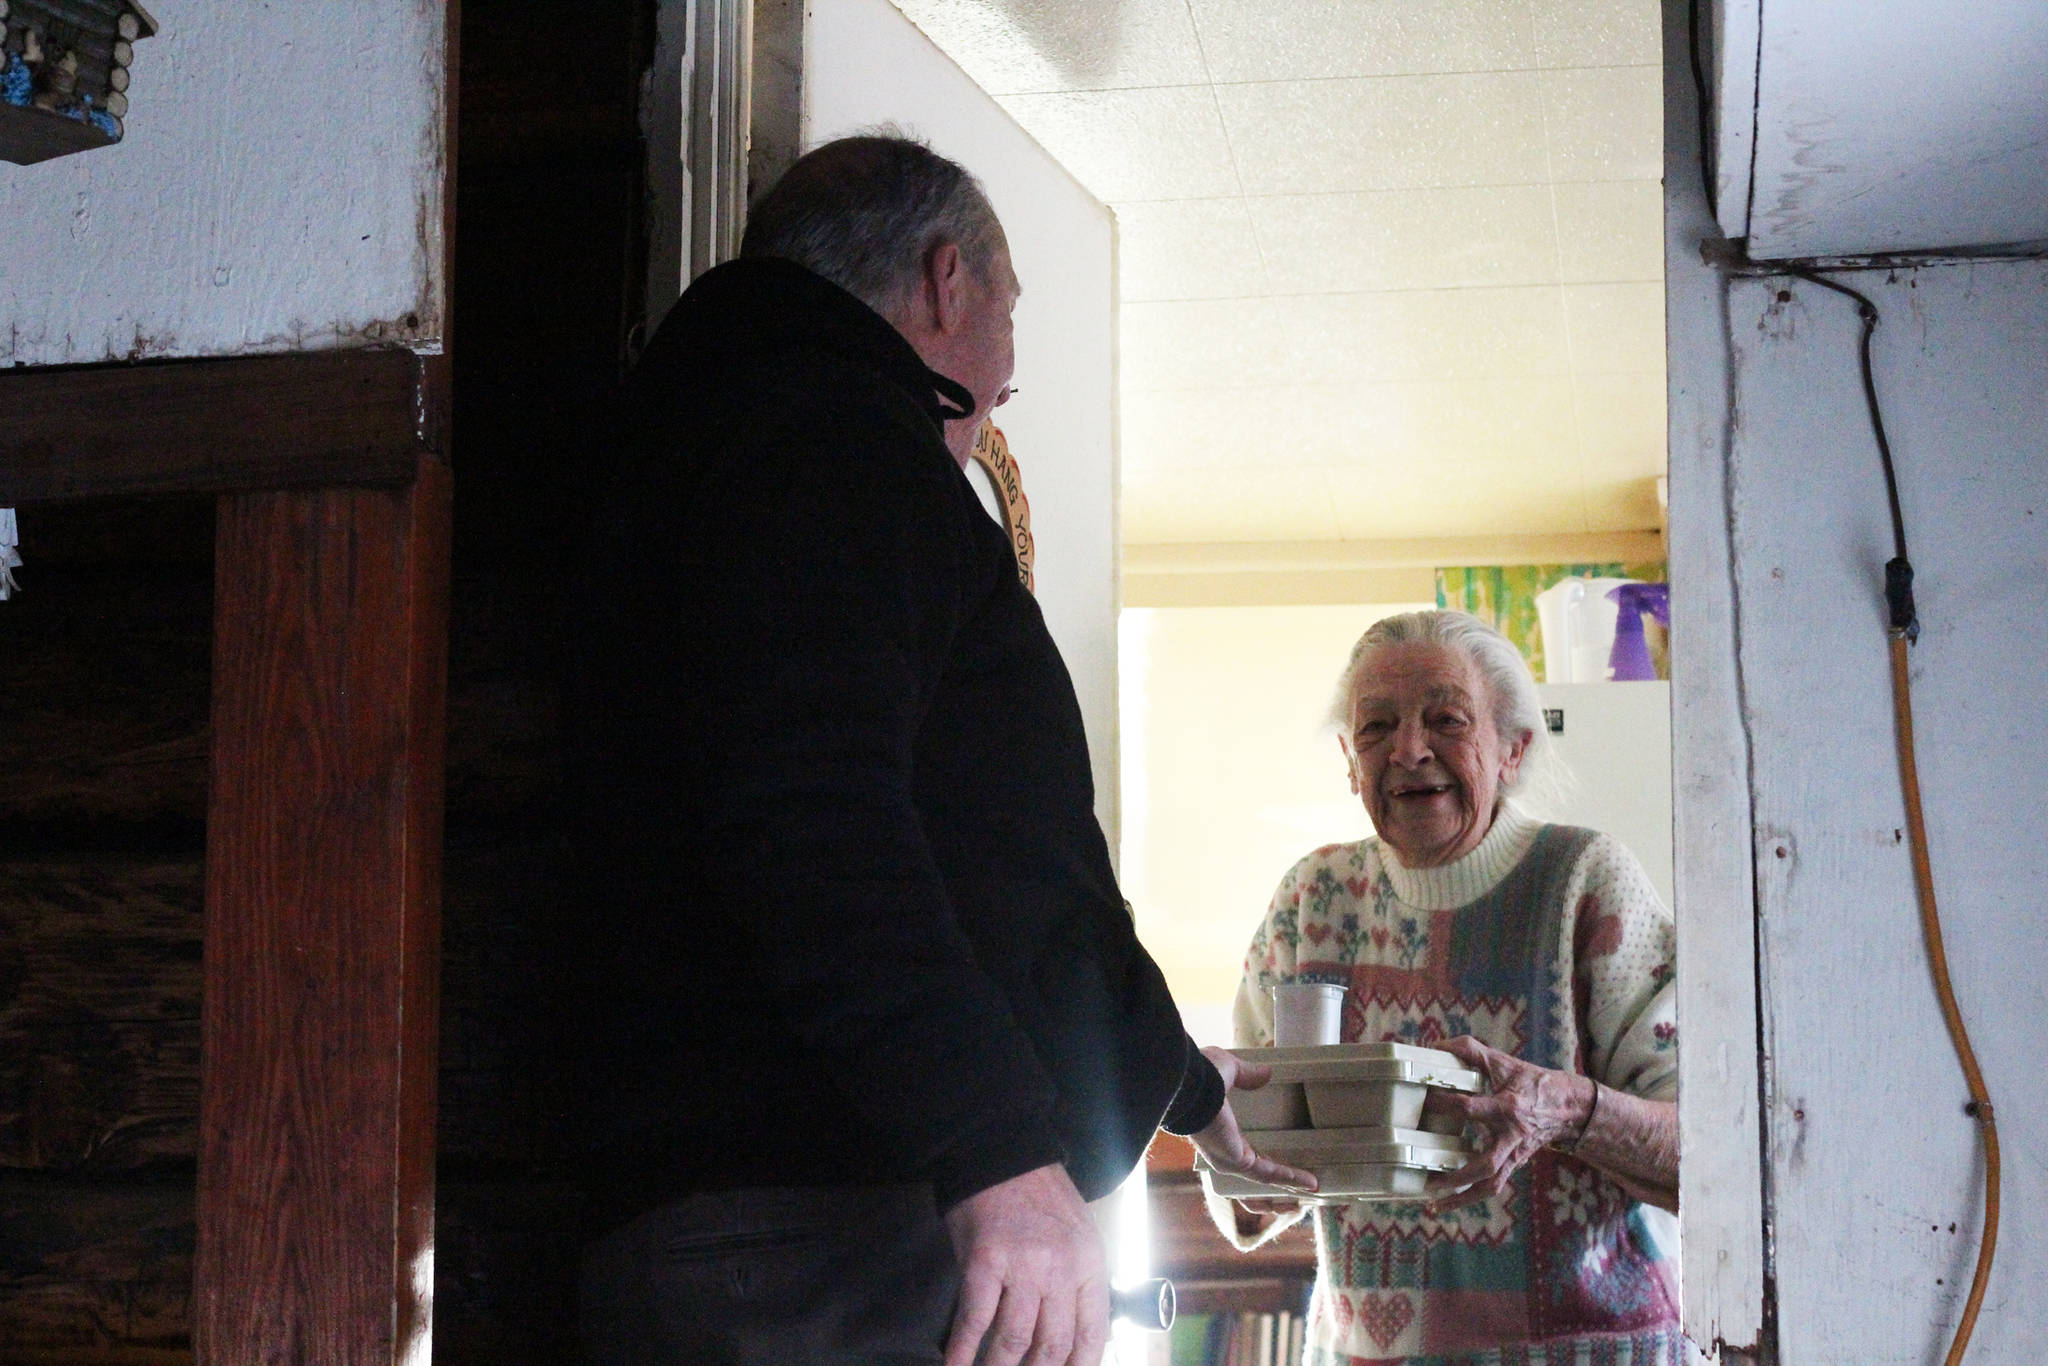 Mayor Bryan Zak delivers the first meal to be driven by the Homer Senior Citizen Center’s new Subaru to resident Marilyn Prevost on Monday, Nov. 20, 2017 in Homer, Alaska. Prevost, 80, has lived in Homer for 73 years and receives some of the more than 3,000 meals given out by the program each year. (Photo by Megan Pacer/Homer News)